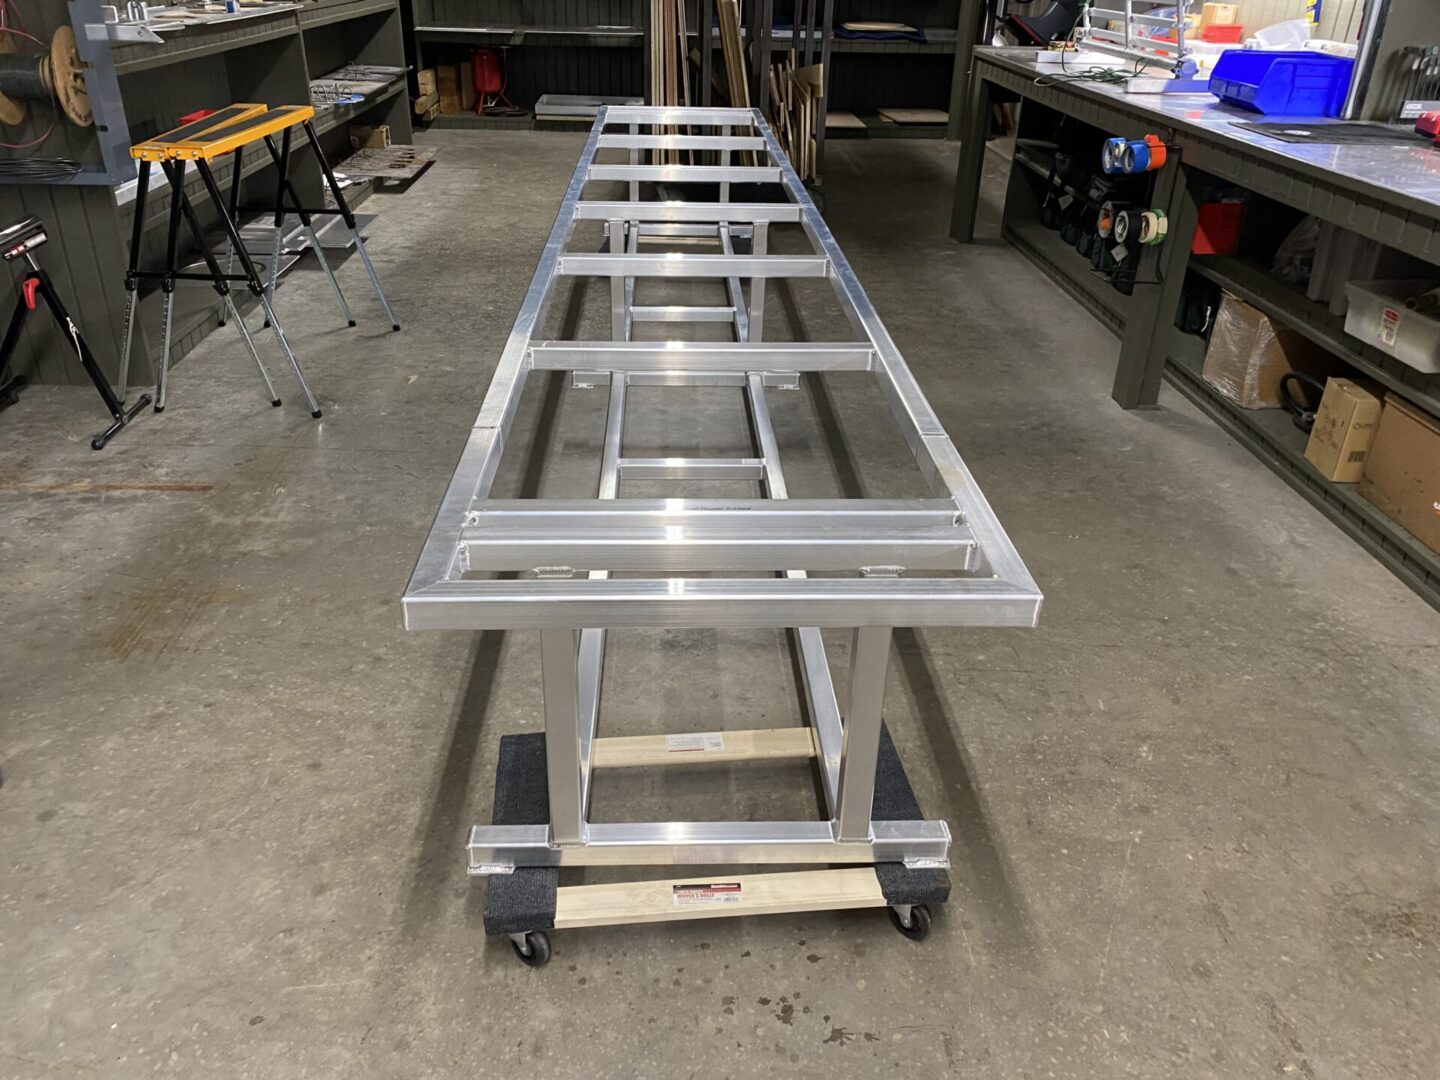 The table frame has been designed and built